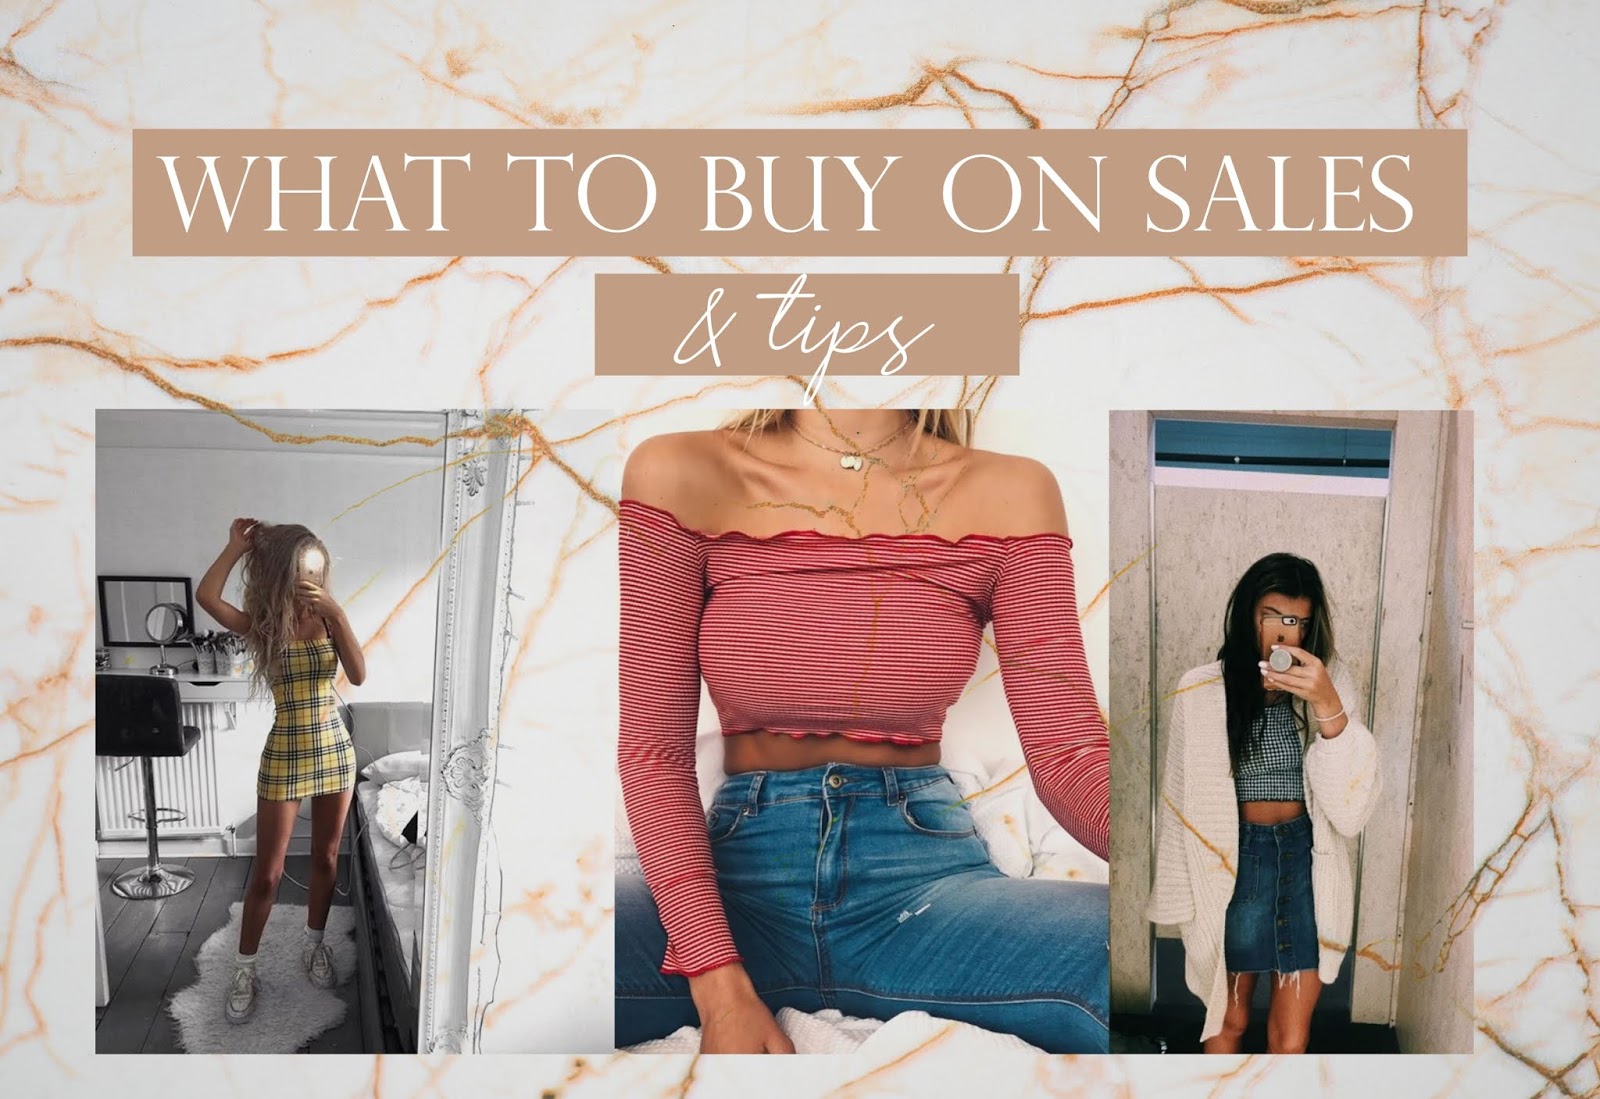 What to buy on sales + tips